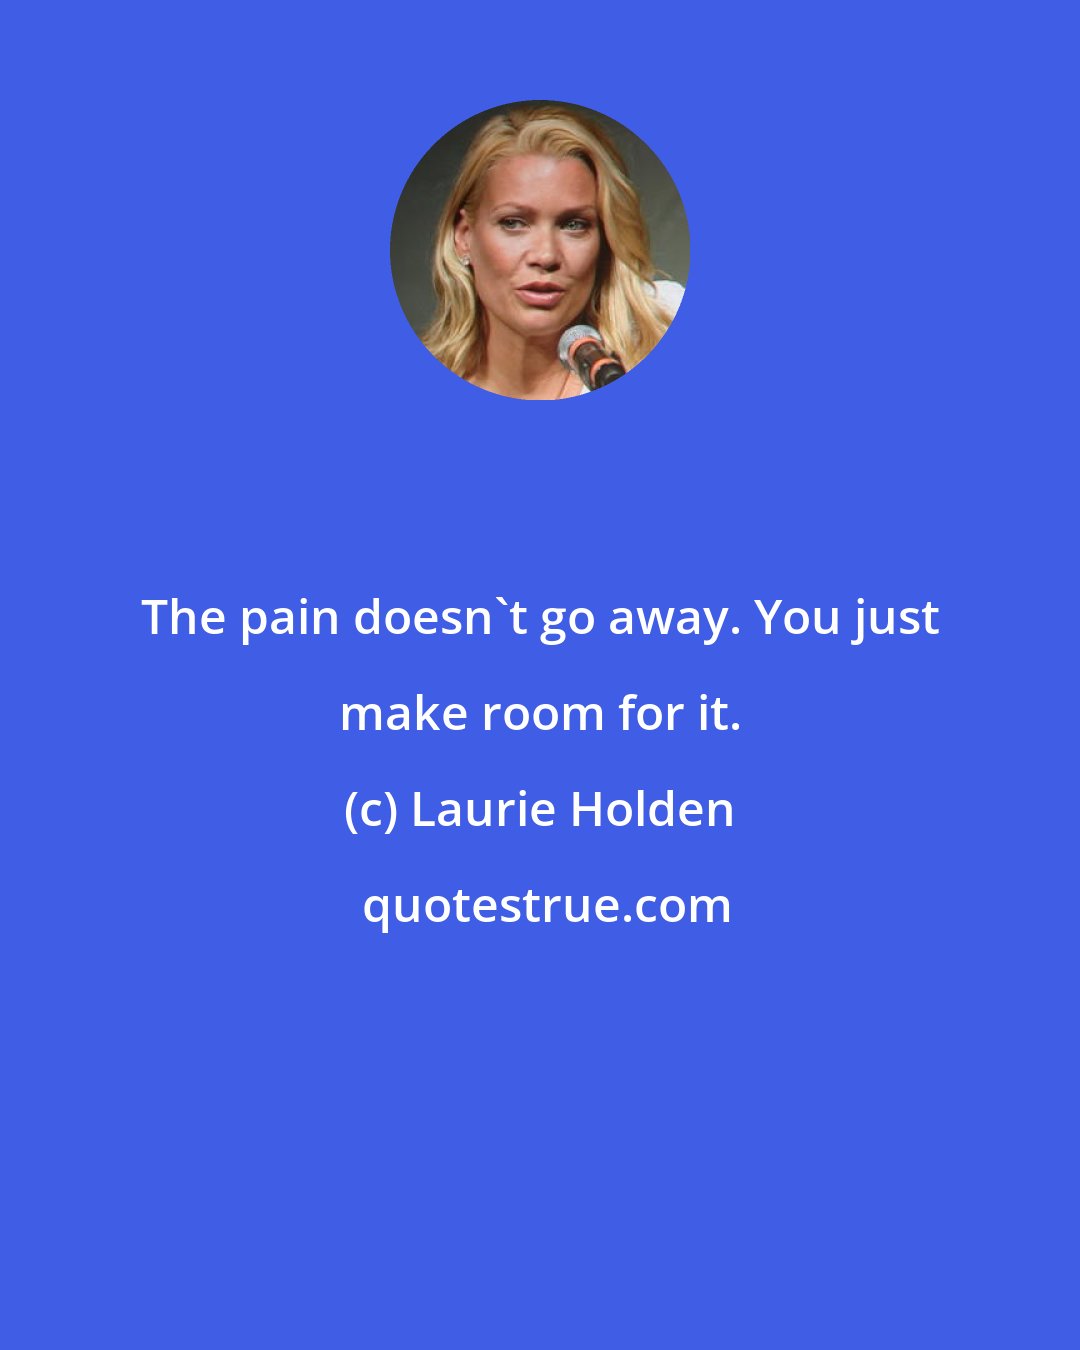 Laurie Holden: The pain doesn't go away. You just make room for it.